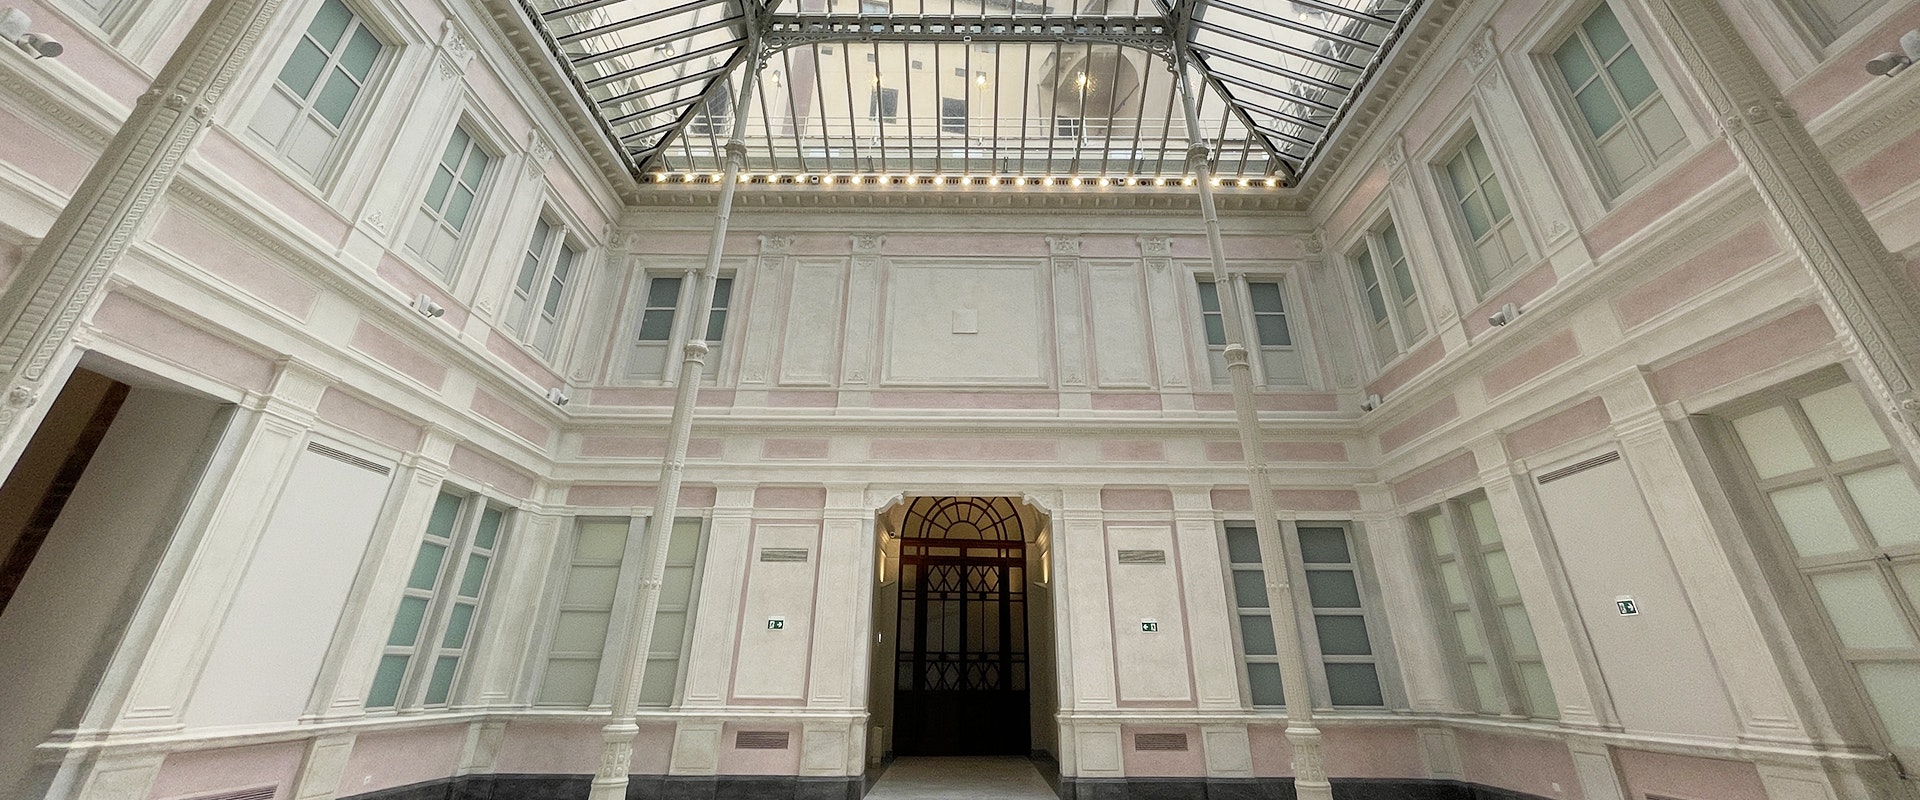 New opening of the Royal Post Office of the Uffizi